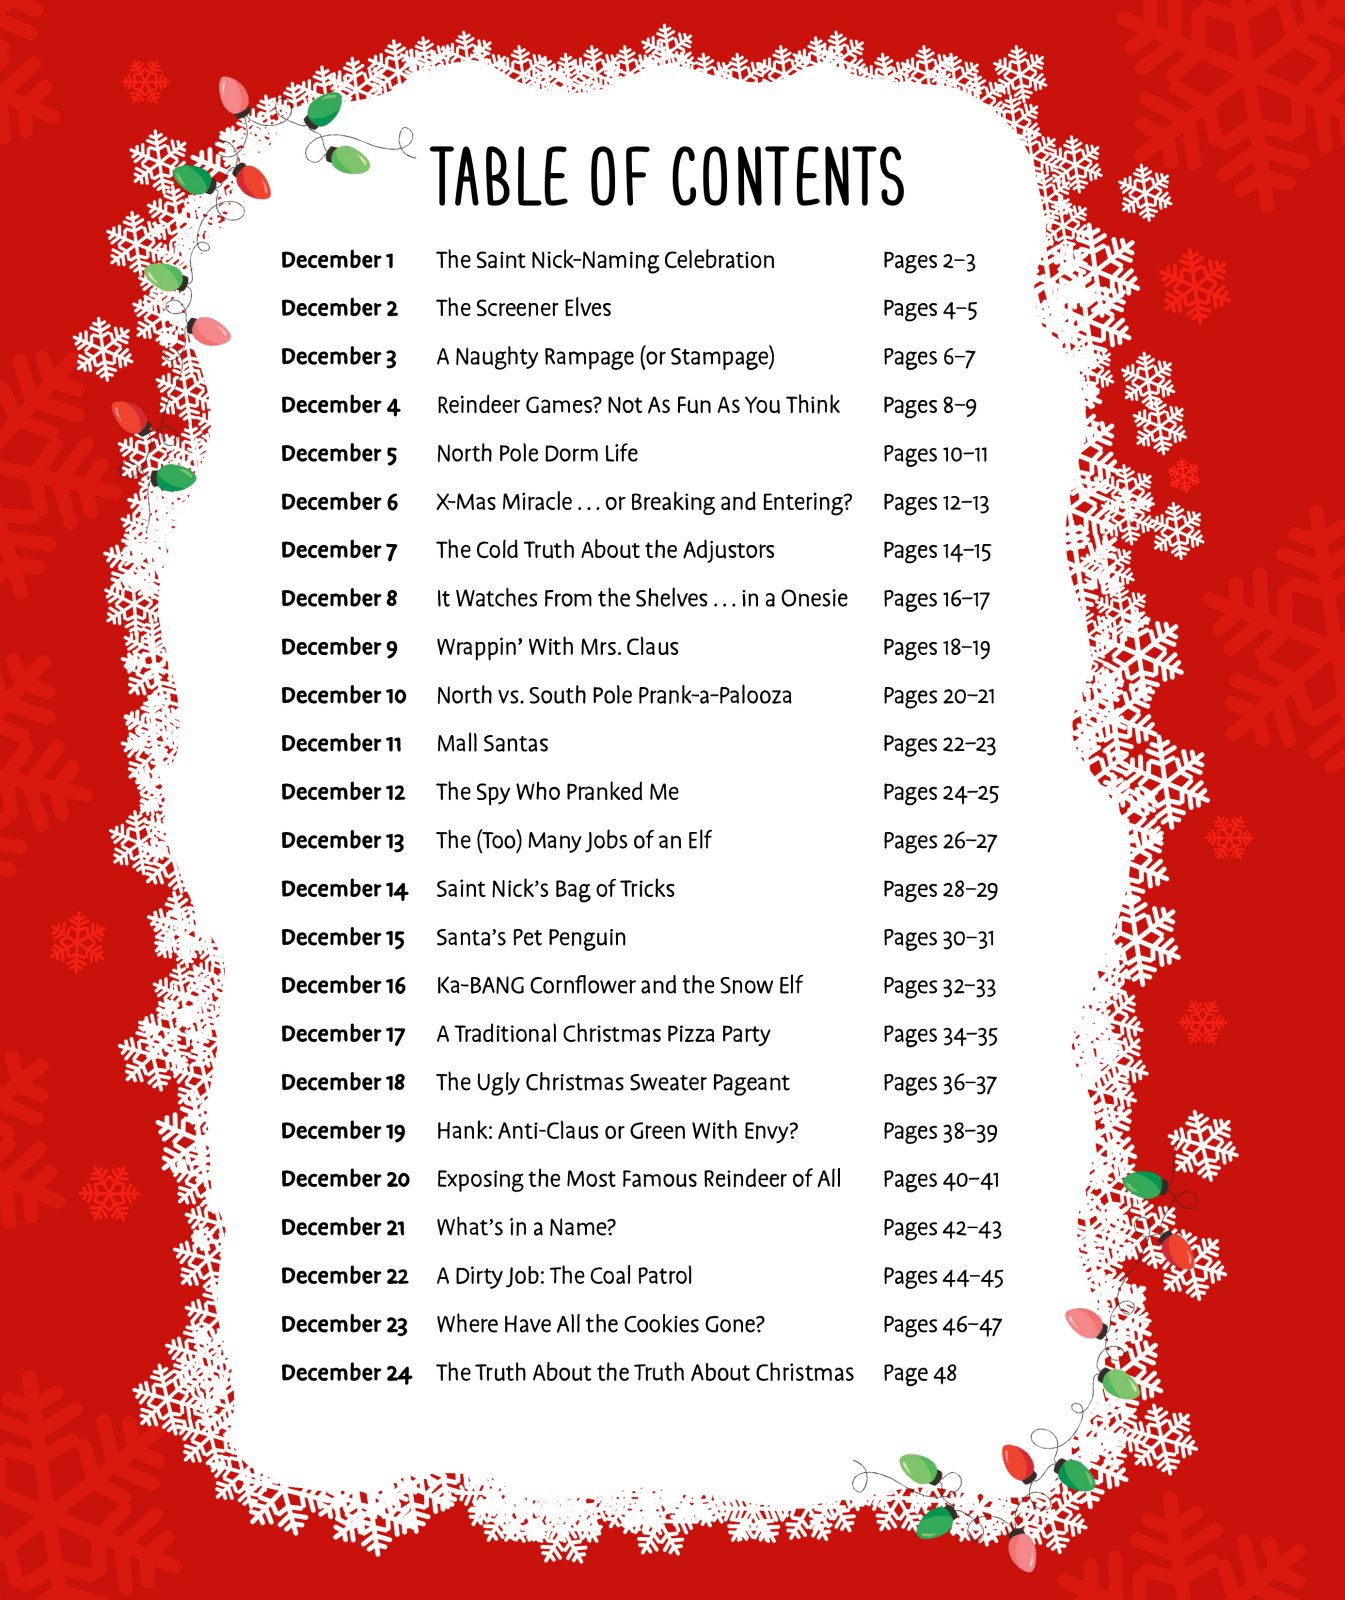 The X-mas Files table of content